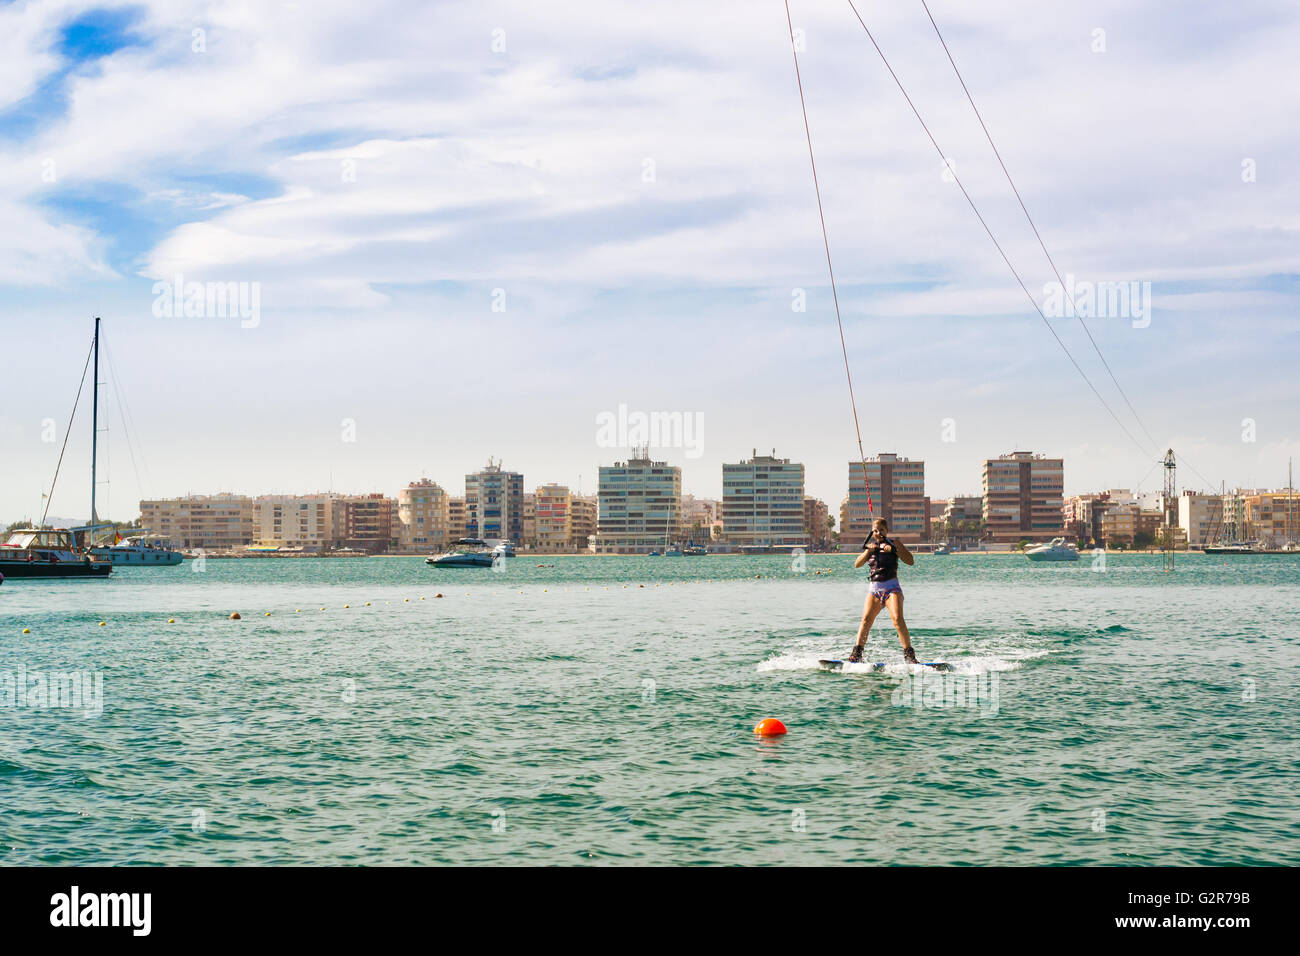 TORREVIEJA, SPAIN - SEPTEMBER 13, 2014: Cute girl learns to surf on background of yachts and boats in La Bocana, Cable Ski Stock Photo